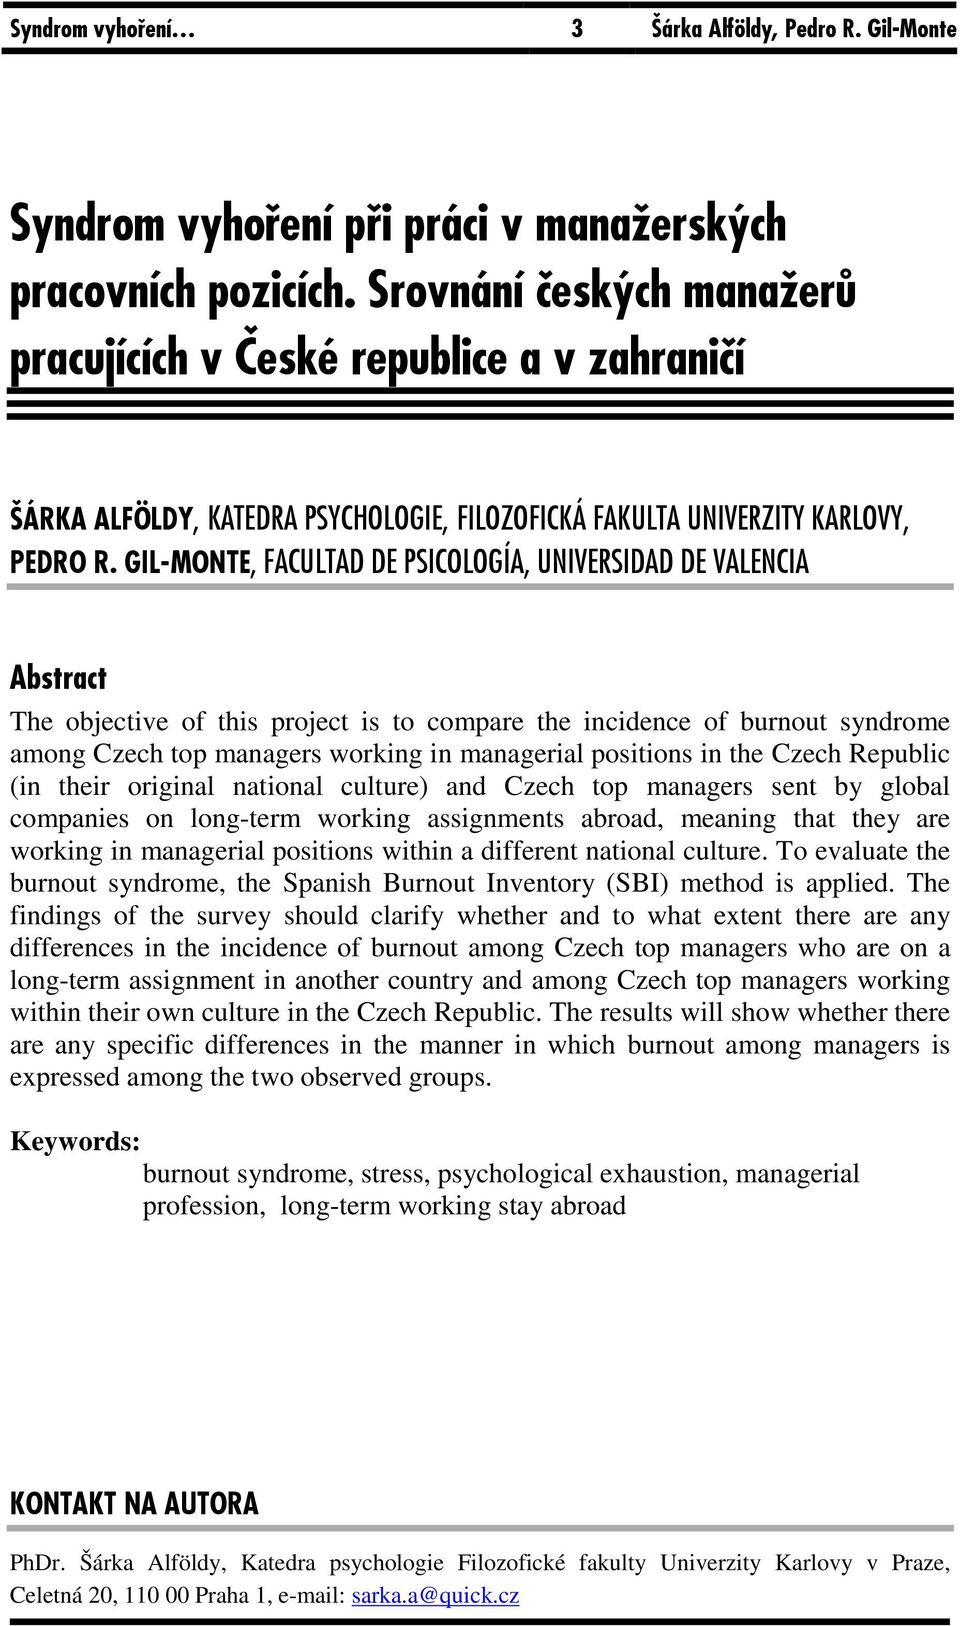 GIL-MONTE, FACULTAD DE PSICOLOGÍA, UNIVERSIDAD DE VALENCIA Abstract The objective of this project is to compare the incidence of burnout syndrome among Czech top managers working in managerial